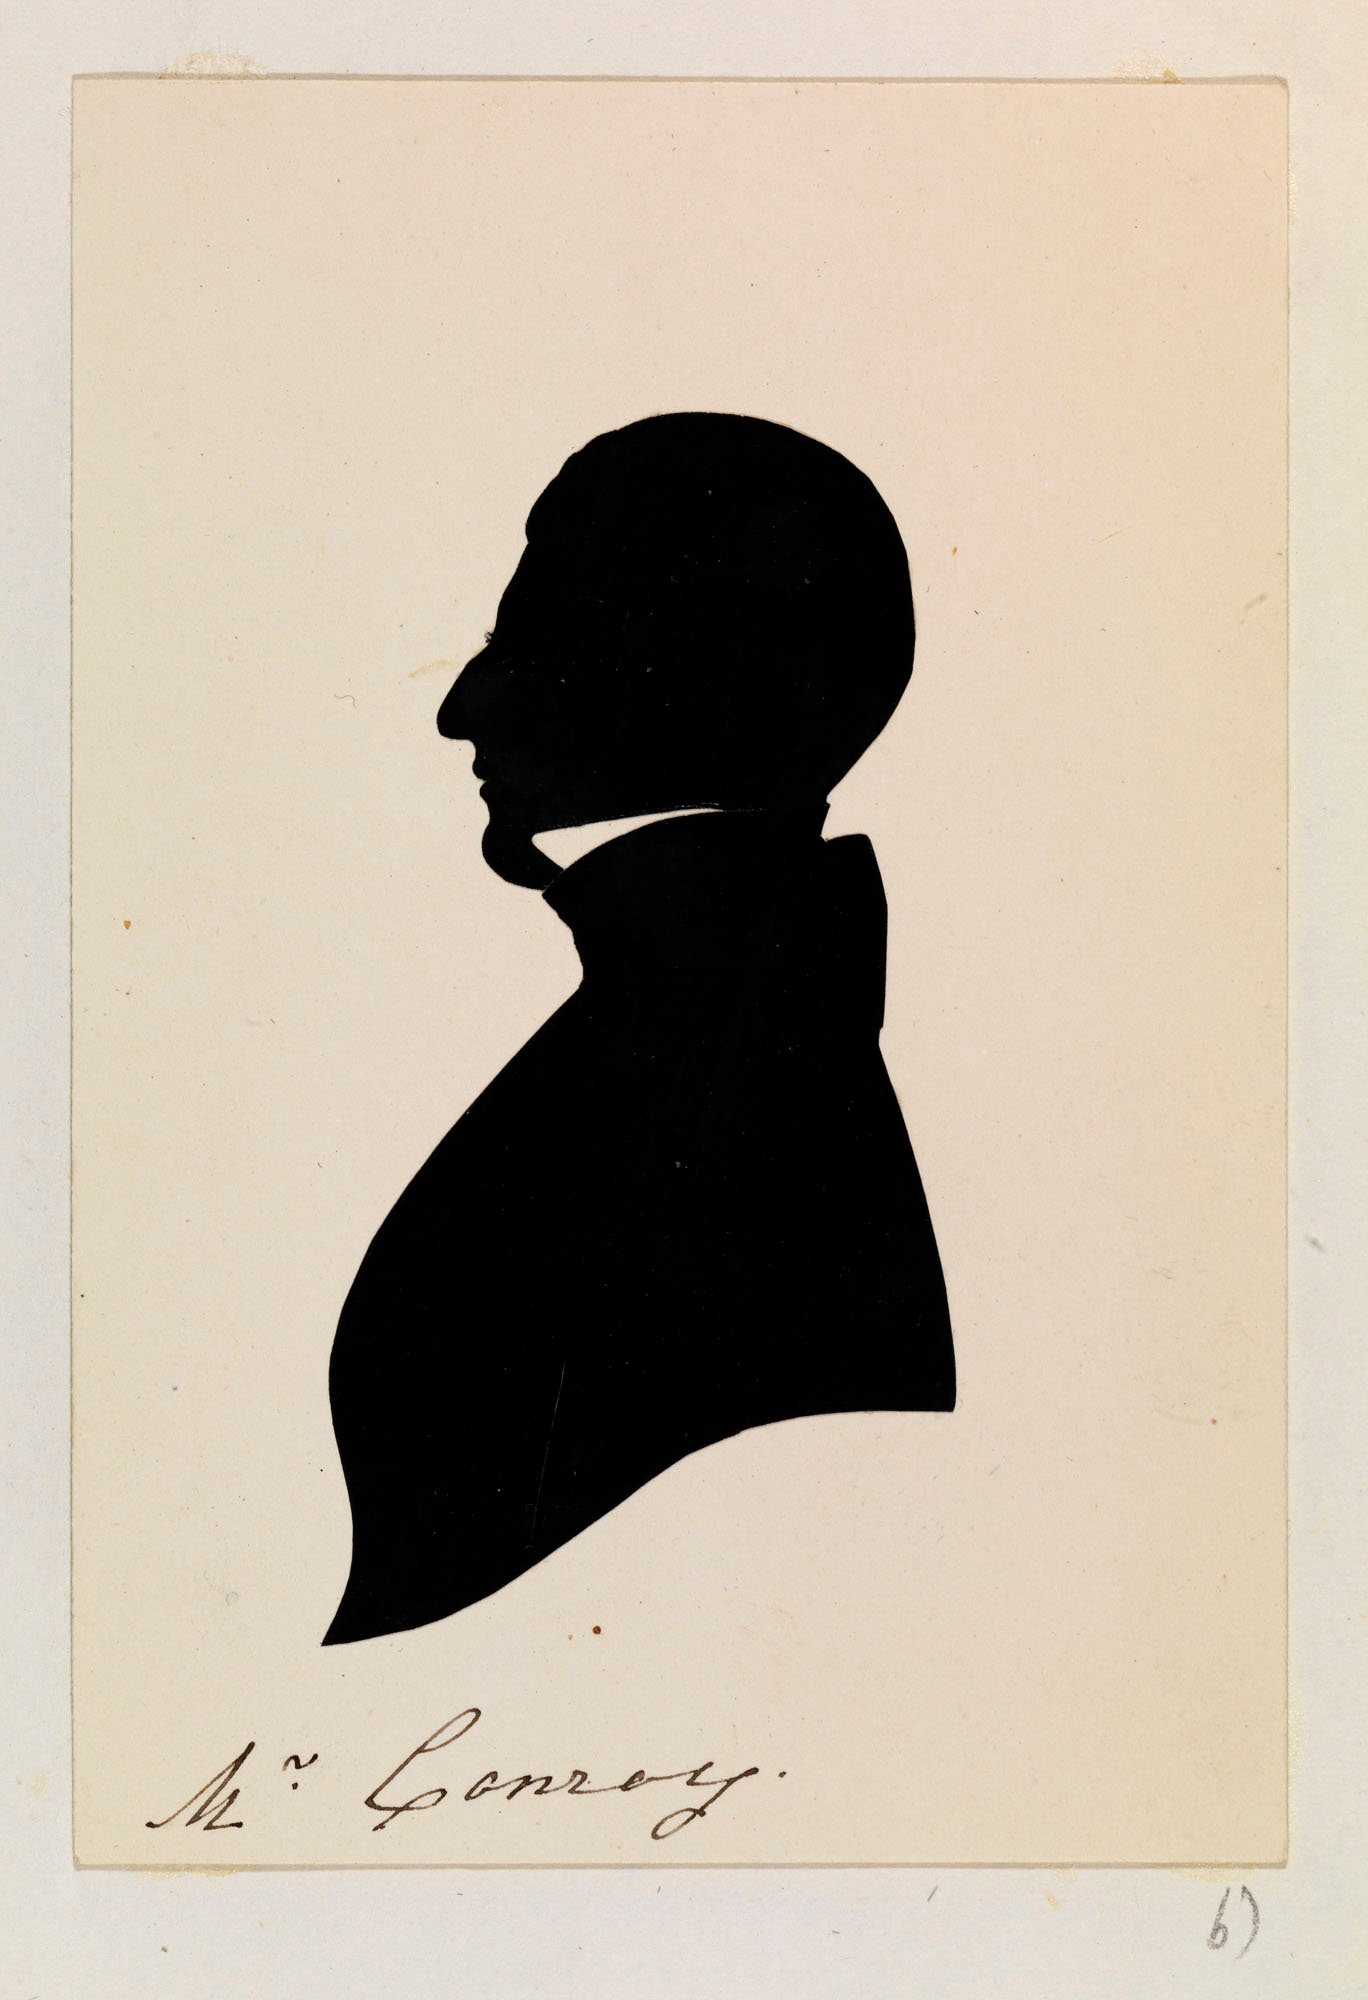 A silhouette showing a portrait of Edward Conroy. He is shown bust-length and facing left in profile. He is wearing nineteenth-century-style dress with a cut-out section depicting the collar of his shirt. Inscribed below: Mr Conroy. 

Edward Conroy was 